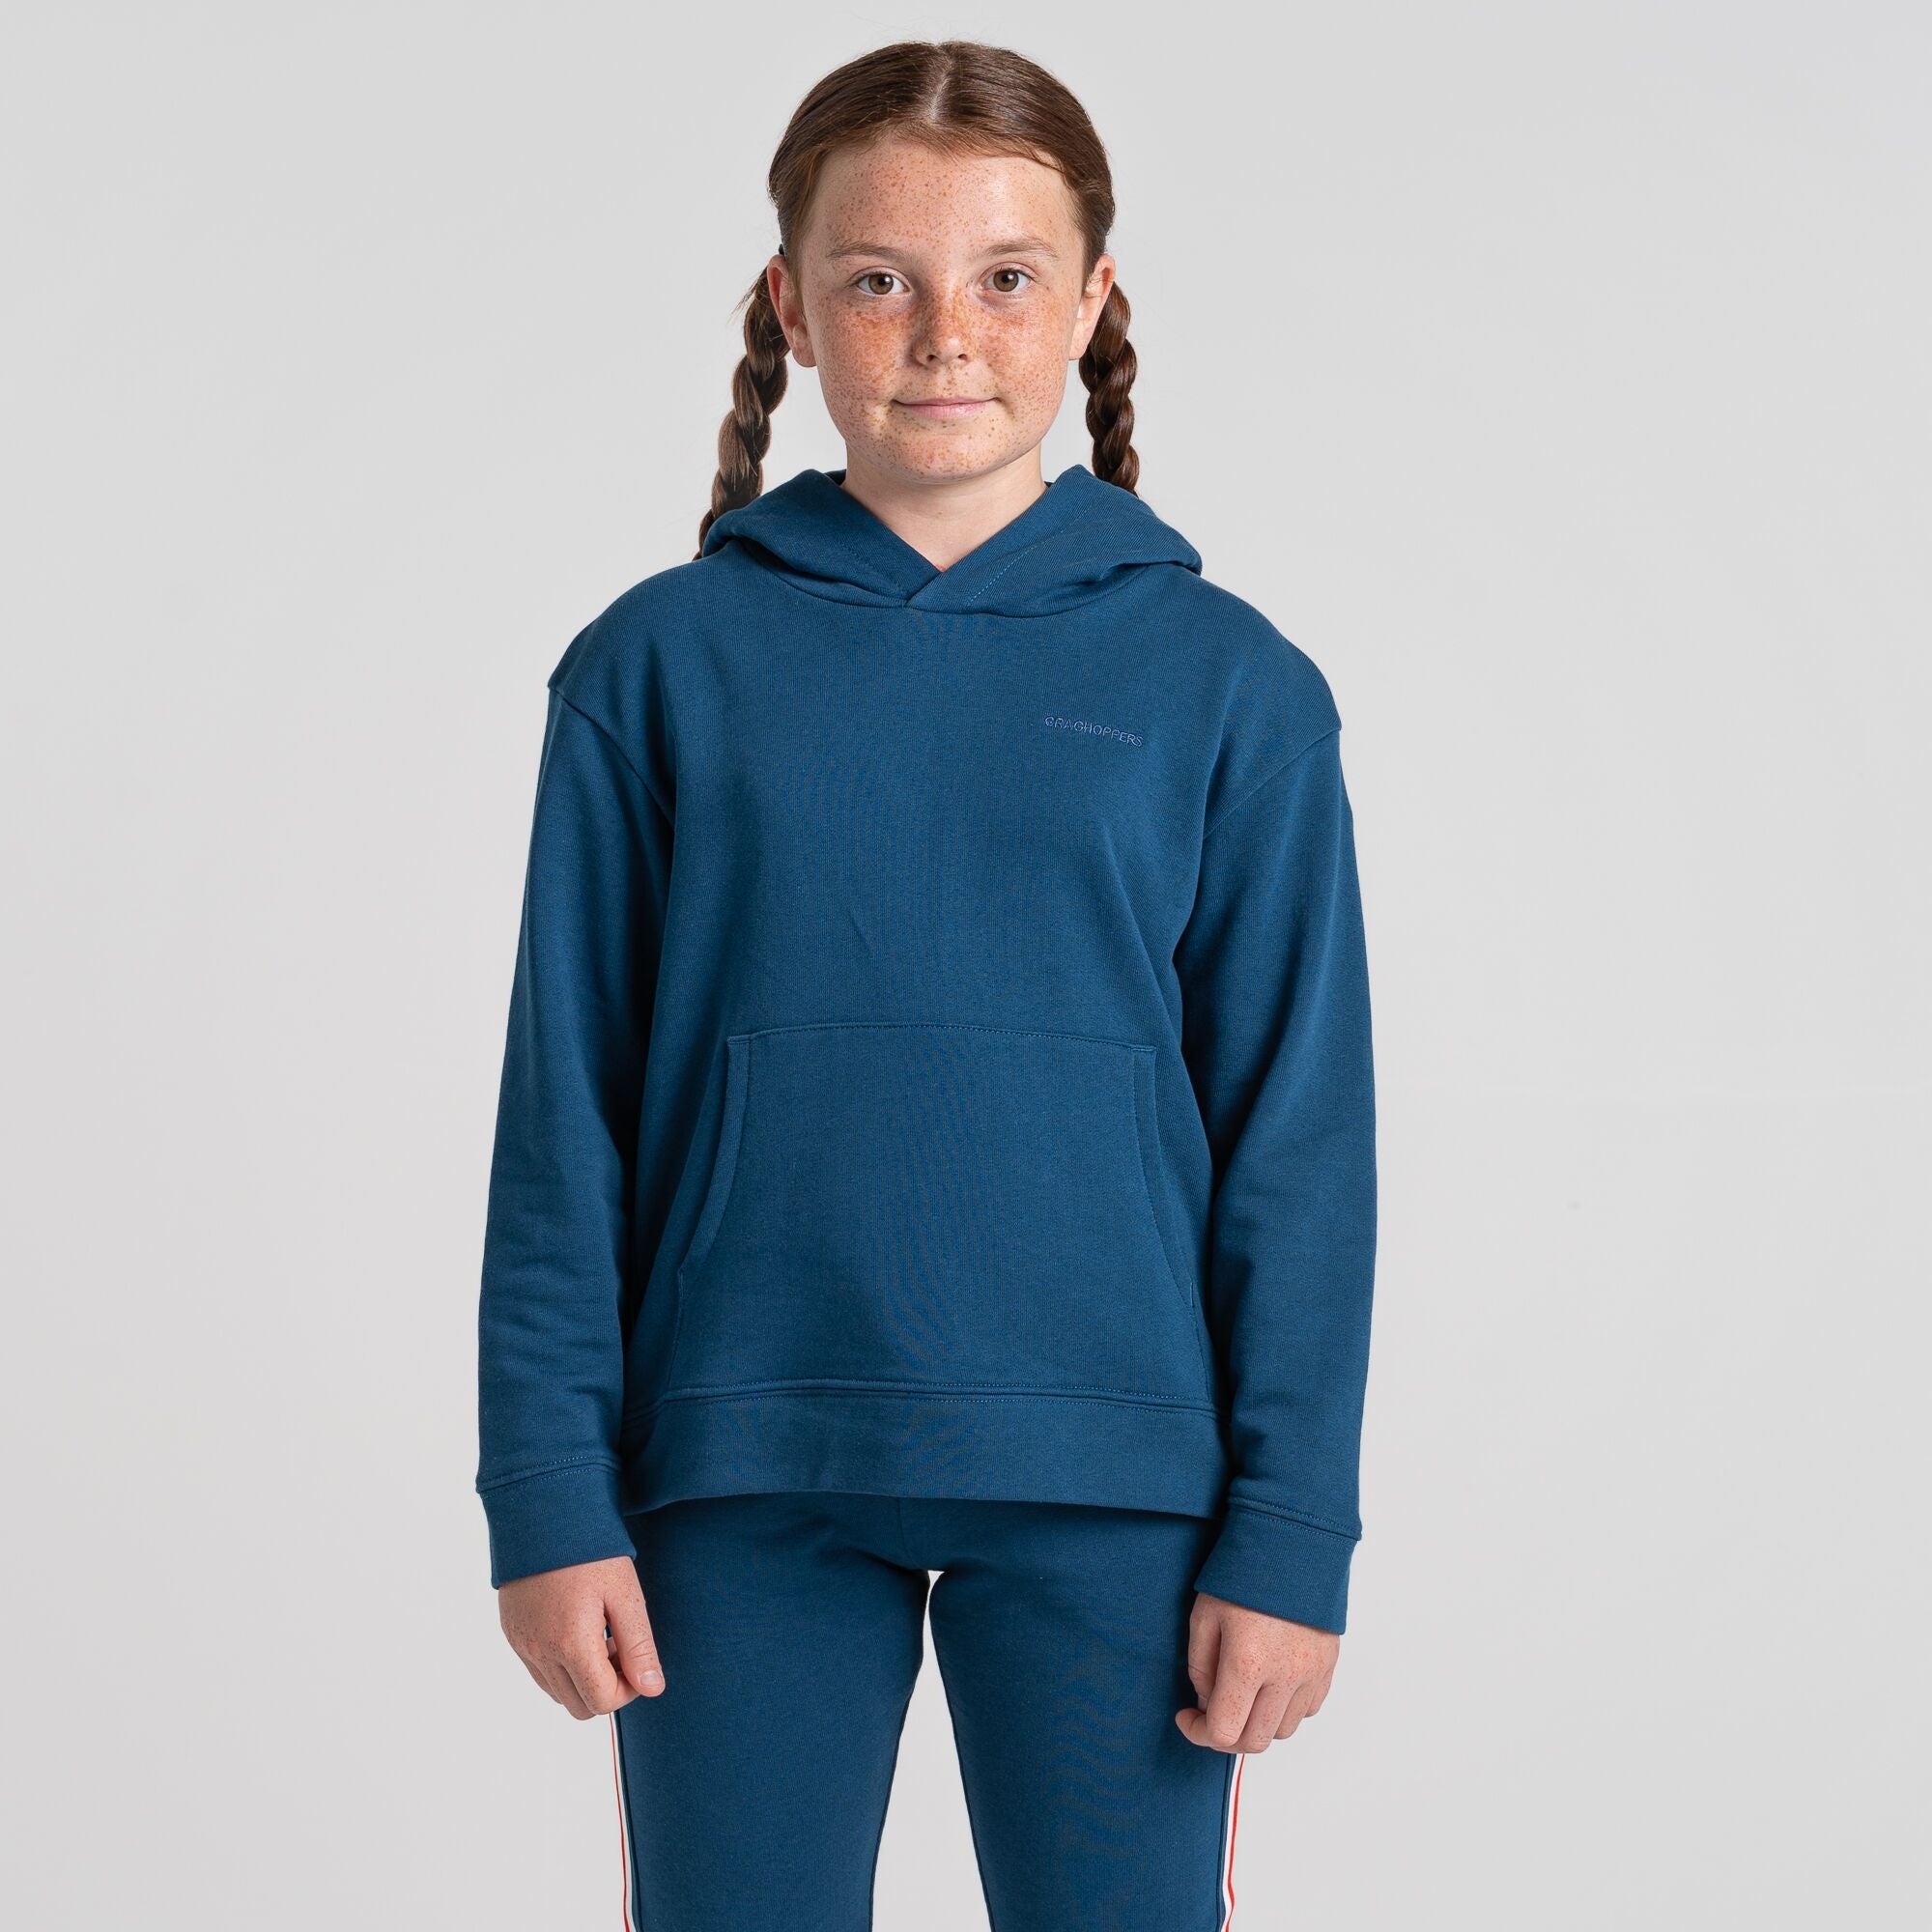 Kids' Insect Shield® Baylor Hooded Top | Poseidon Blue